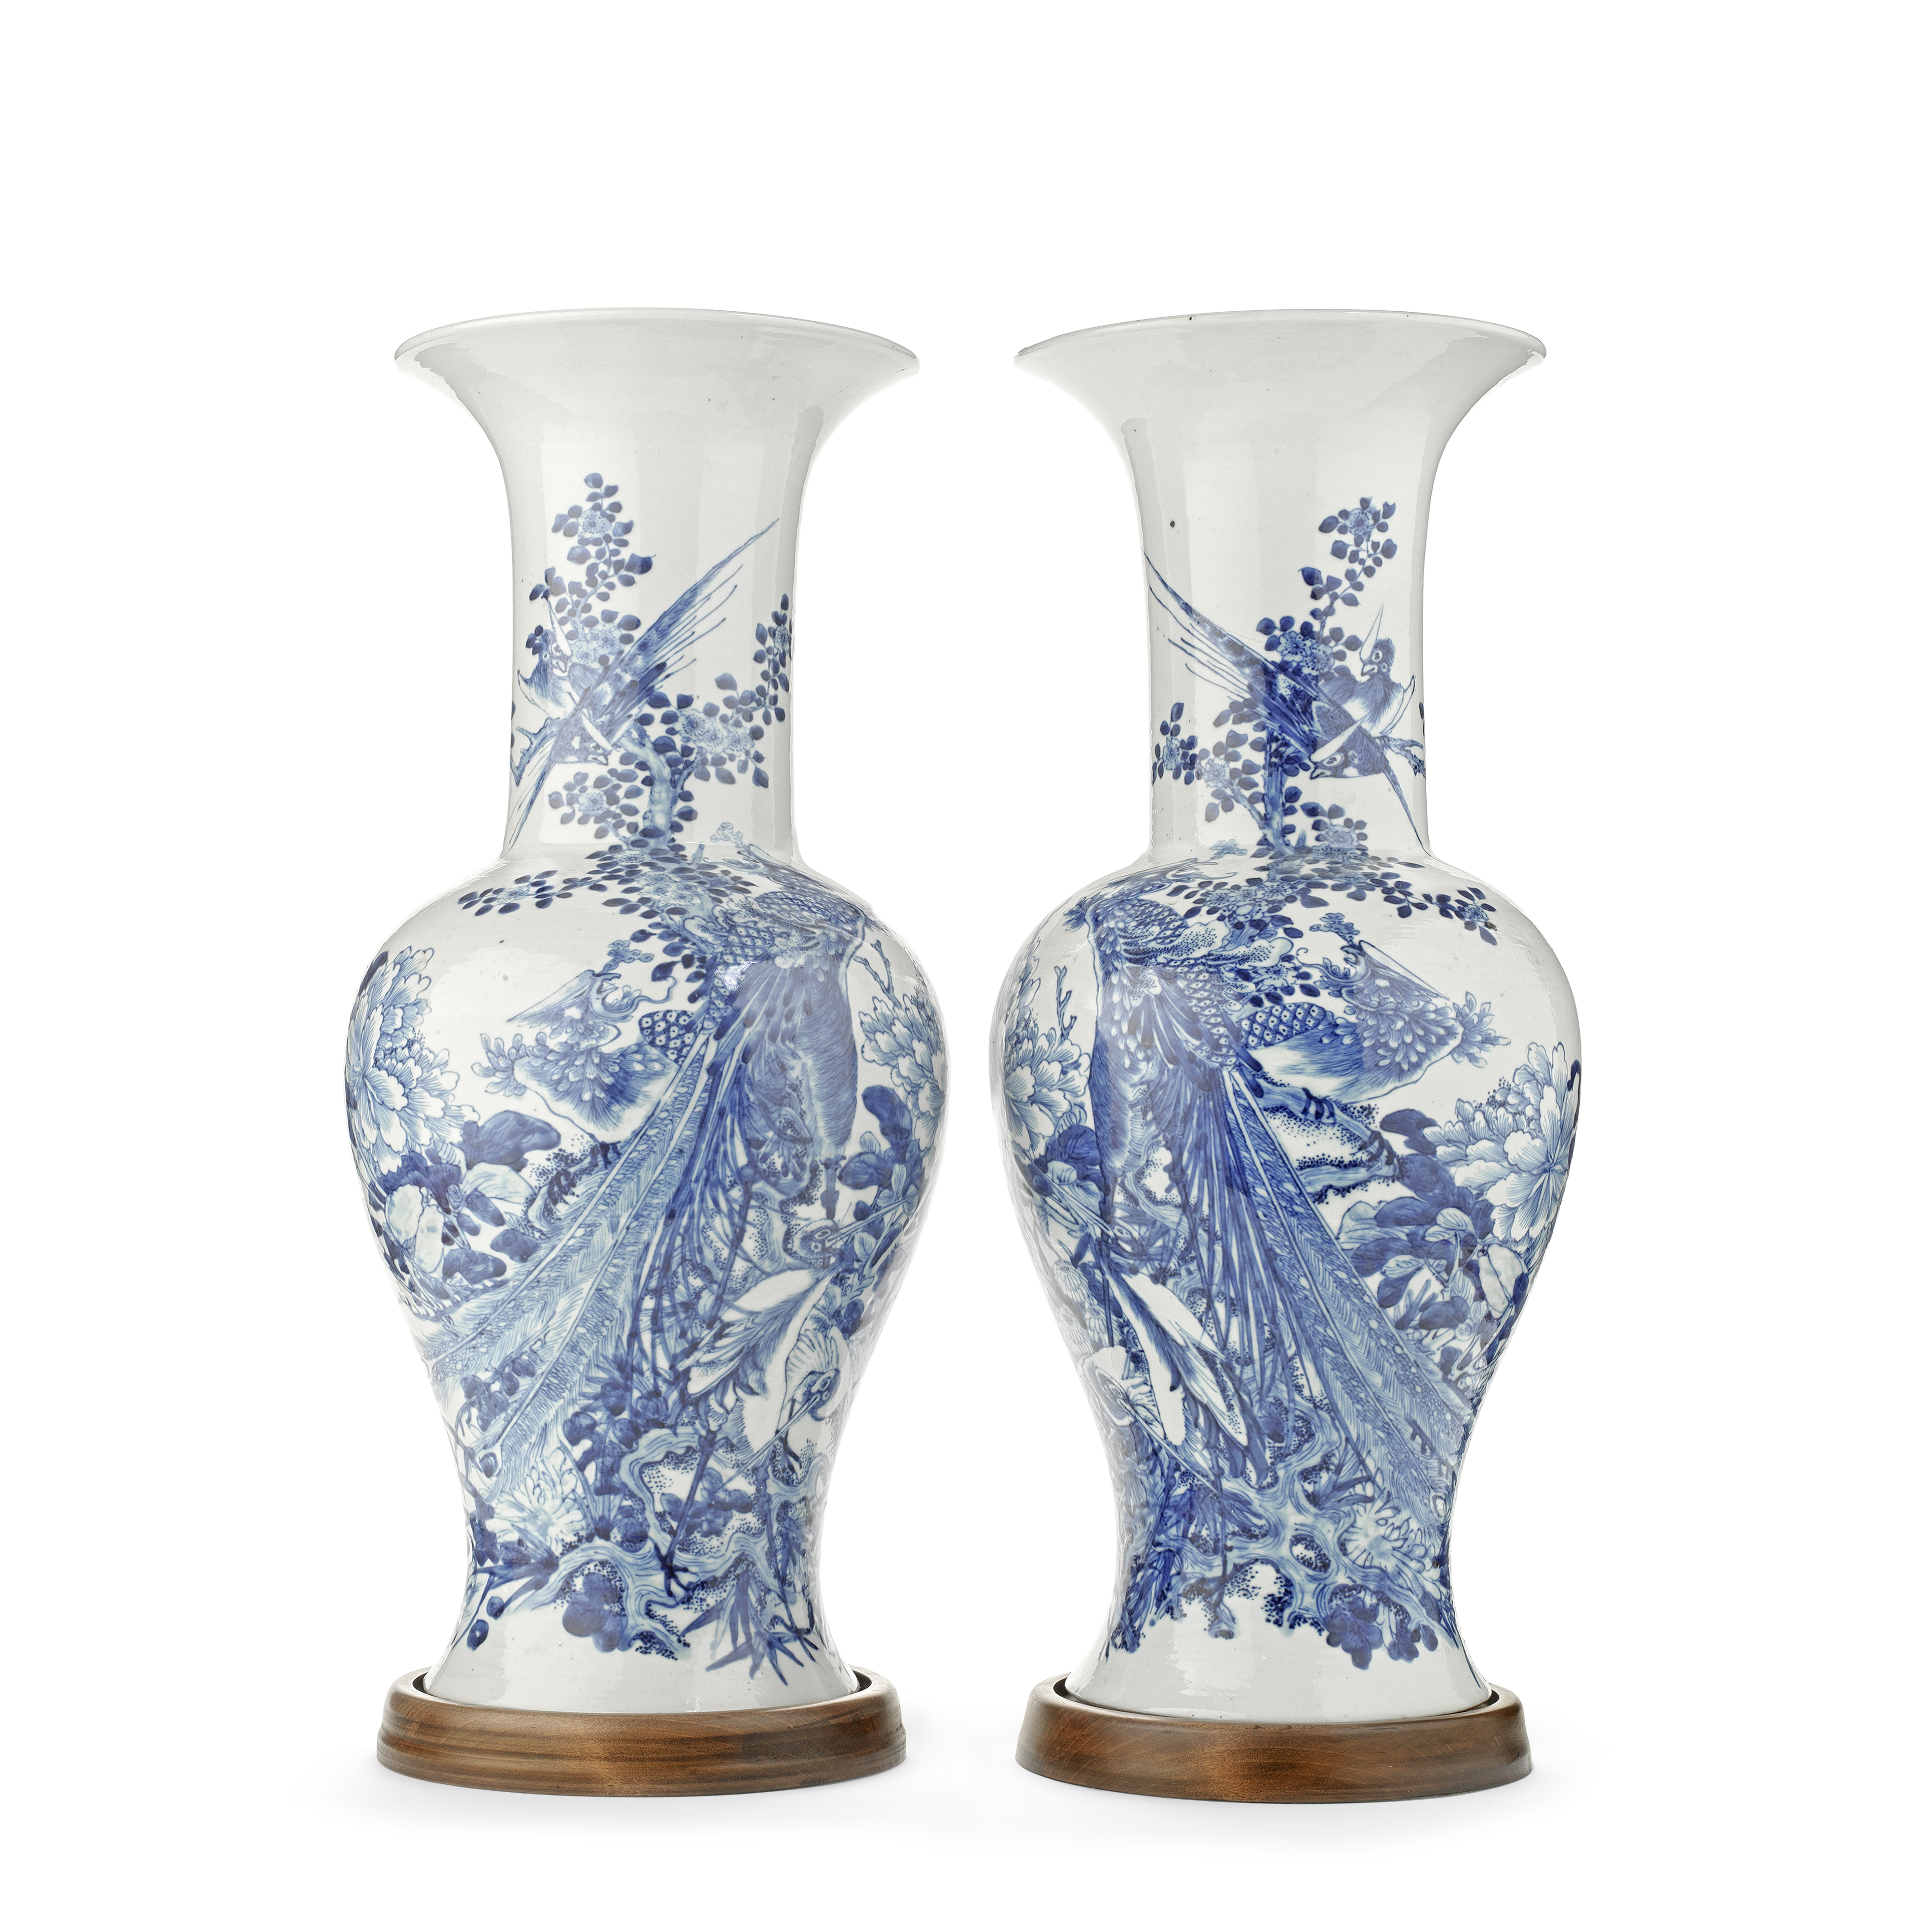 A PAIR OF CHINESE BLUE AND WHITE 'PEACOCK' VASES Late Qing Dynasty